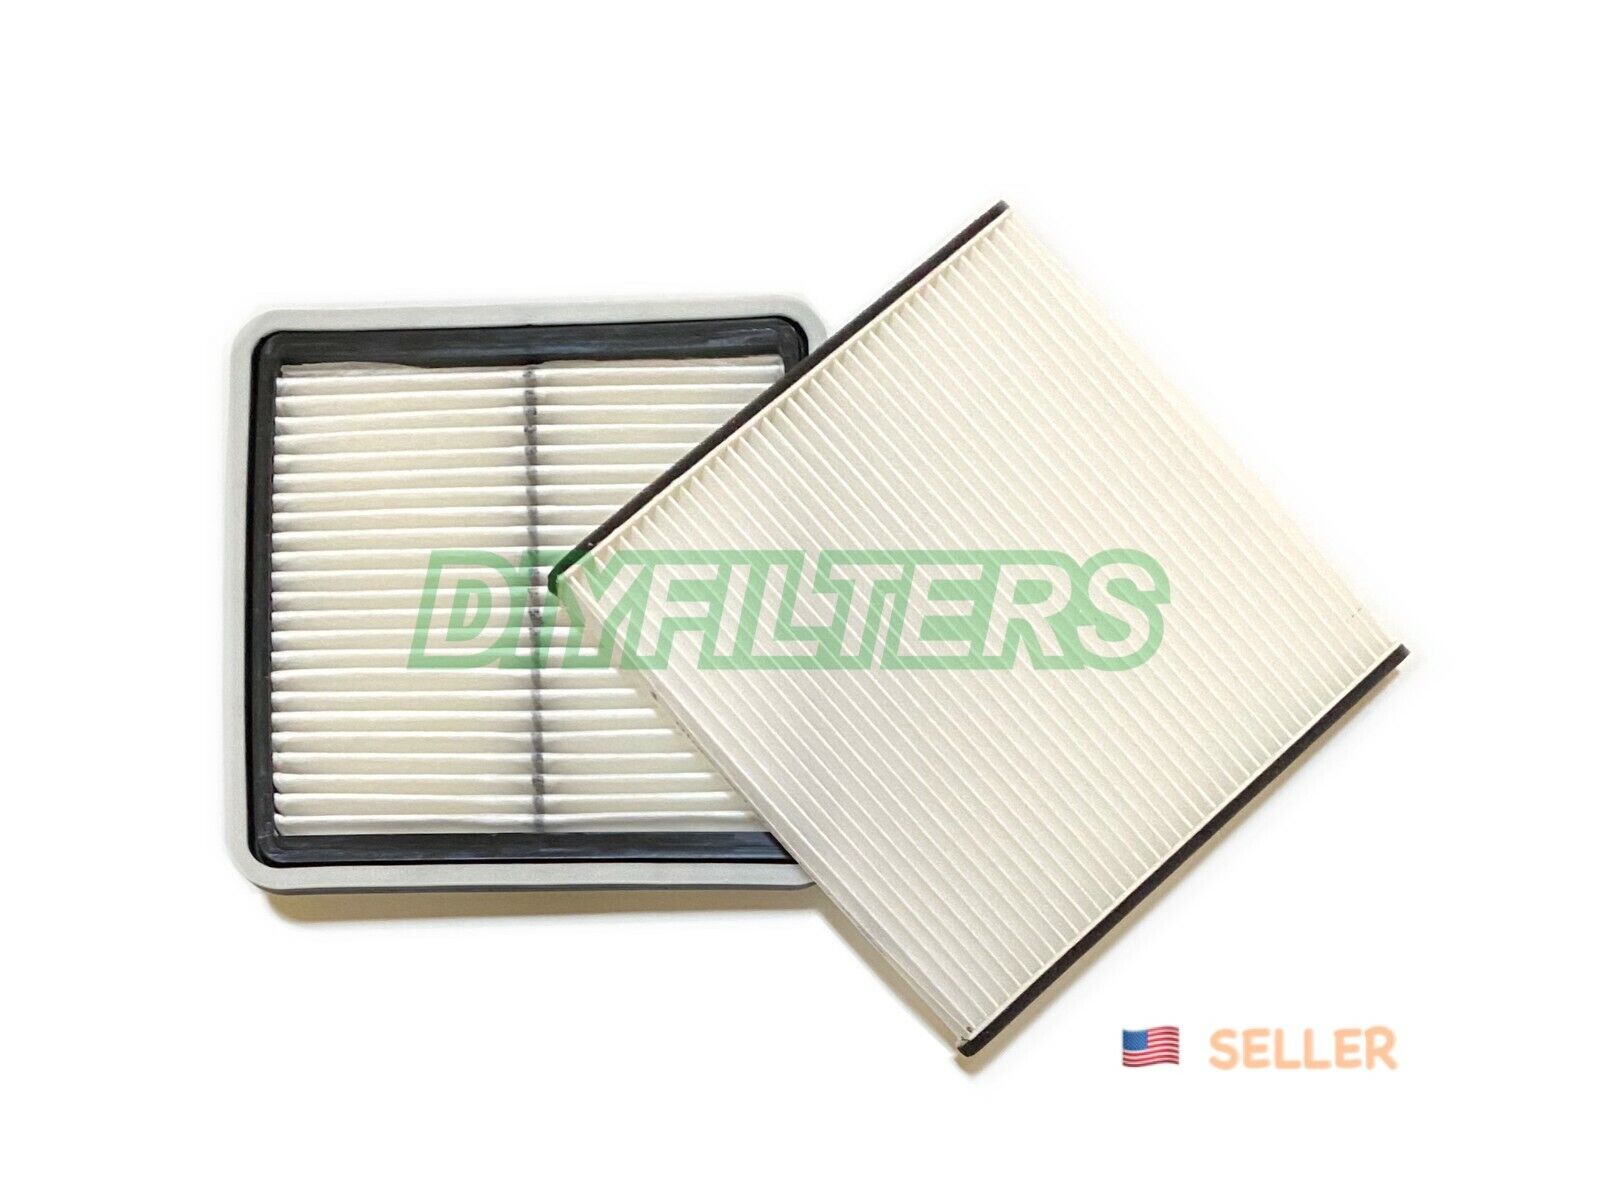 ENGINE & CABIN AIR FILTER for B9 Tribeca 06-07 & Outback Legacy 05-09 US SELLER